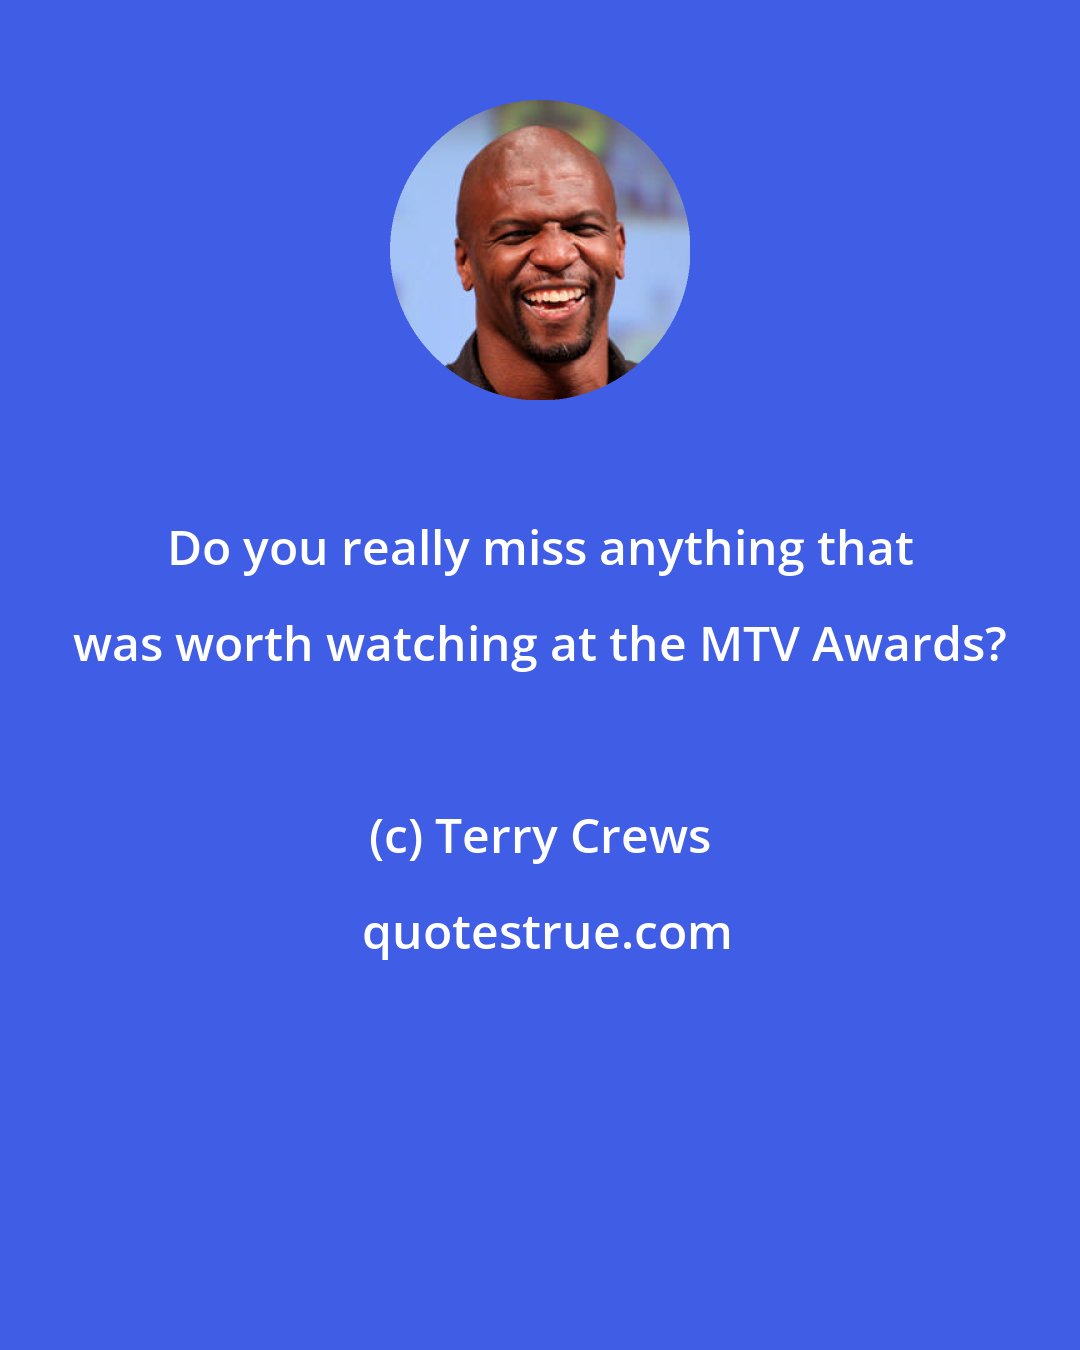 Terry Crews: Do you really miss anything that was worth watching at the MTV Awards?